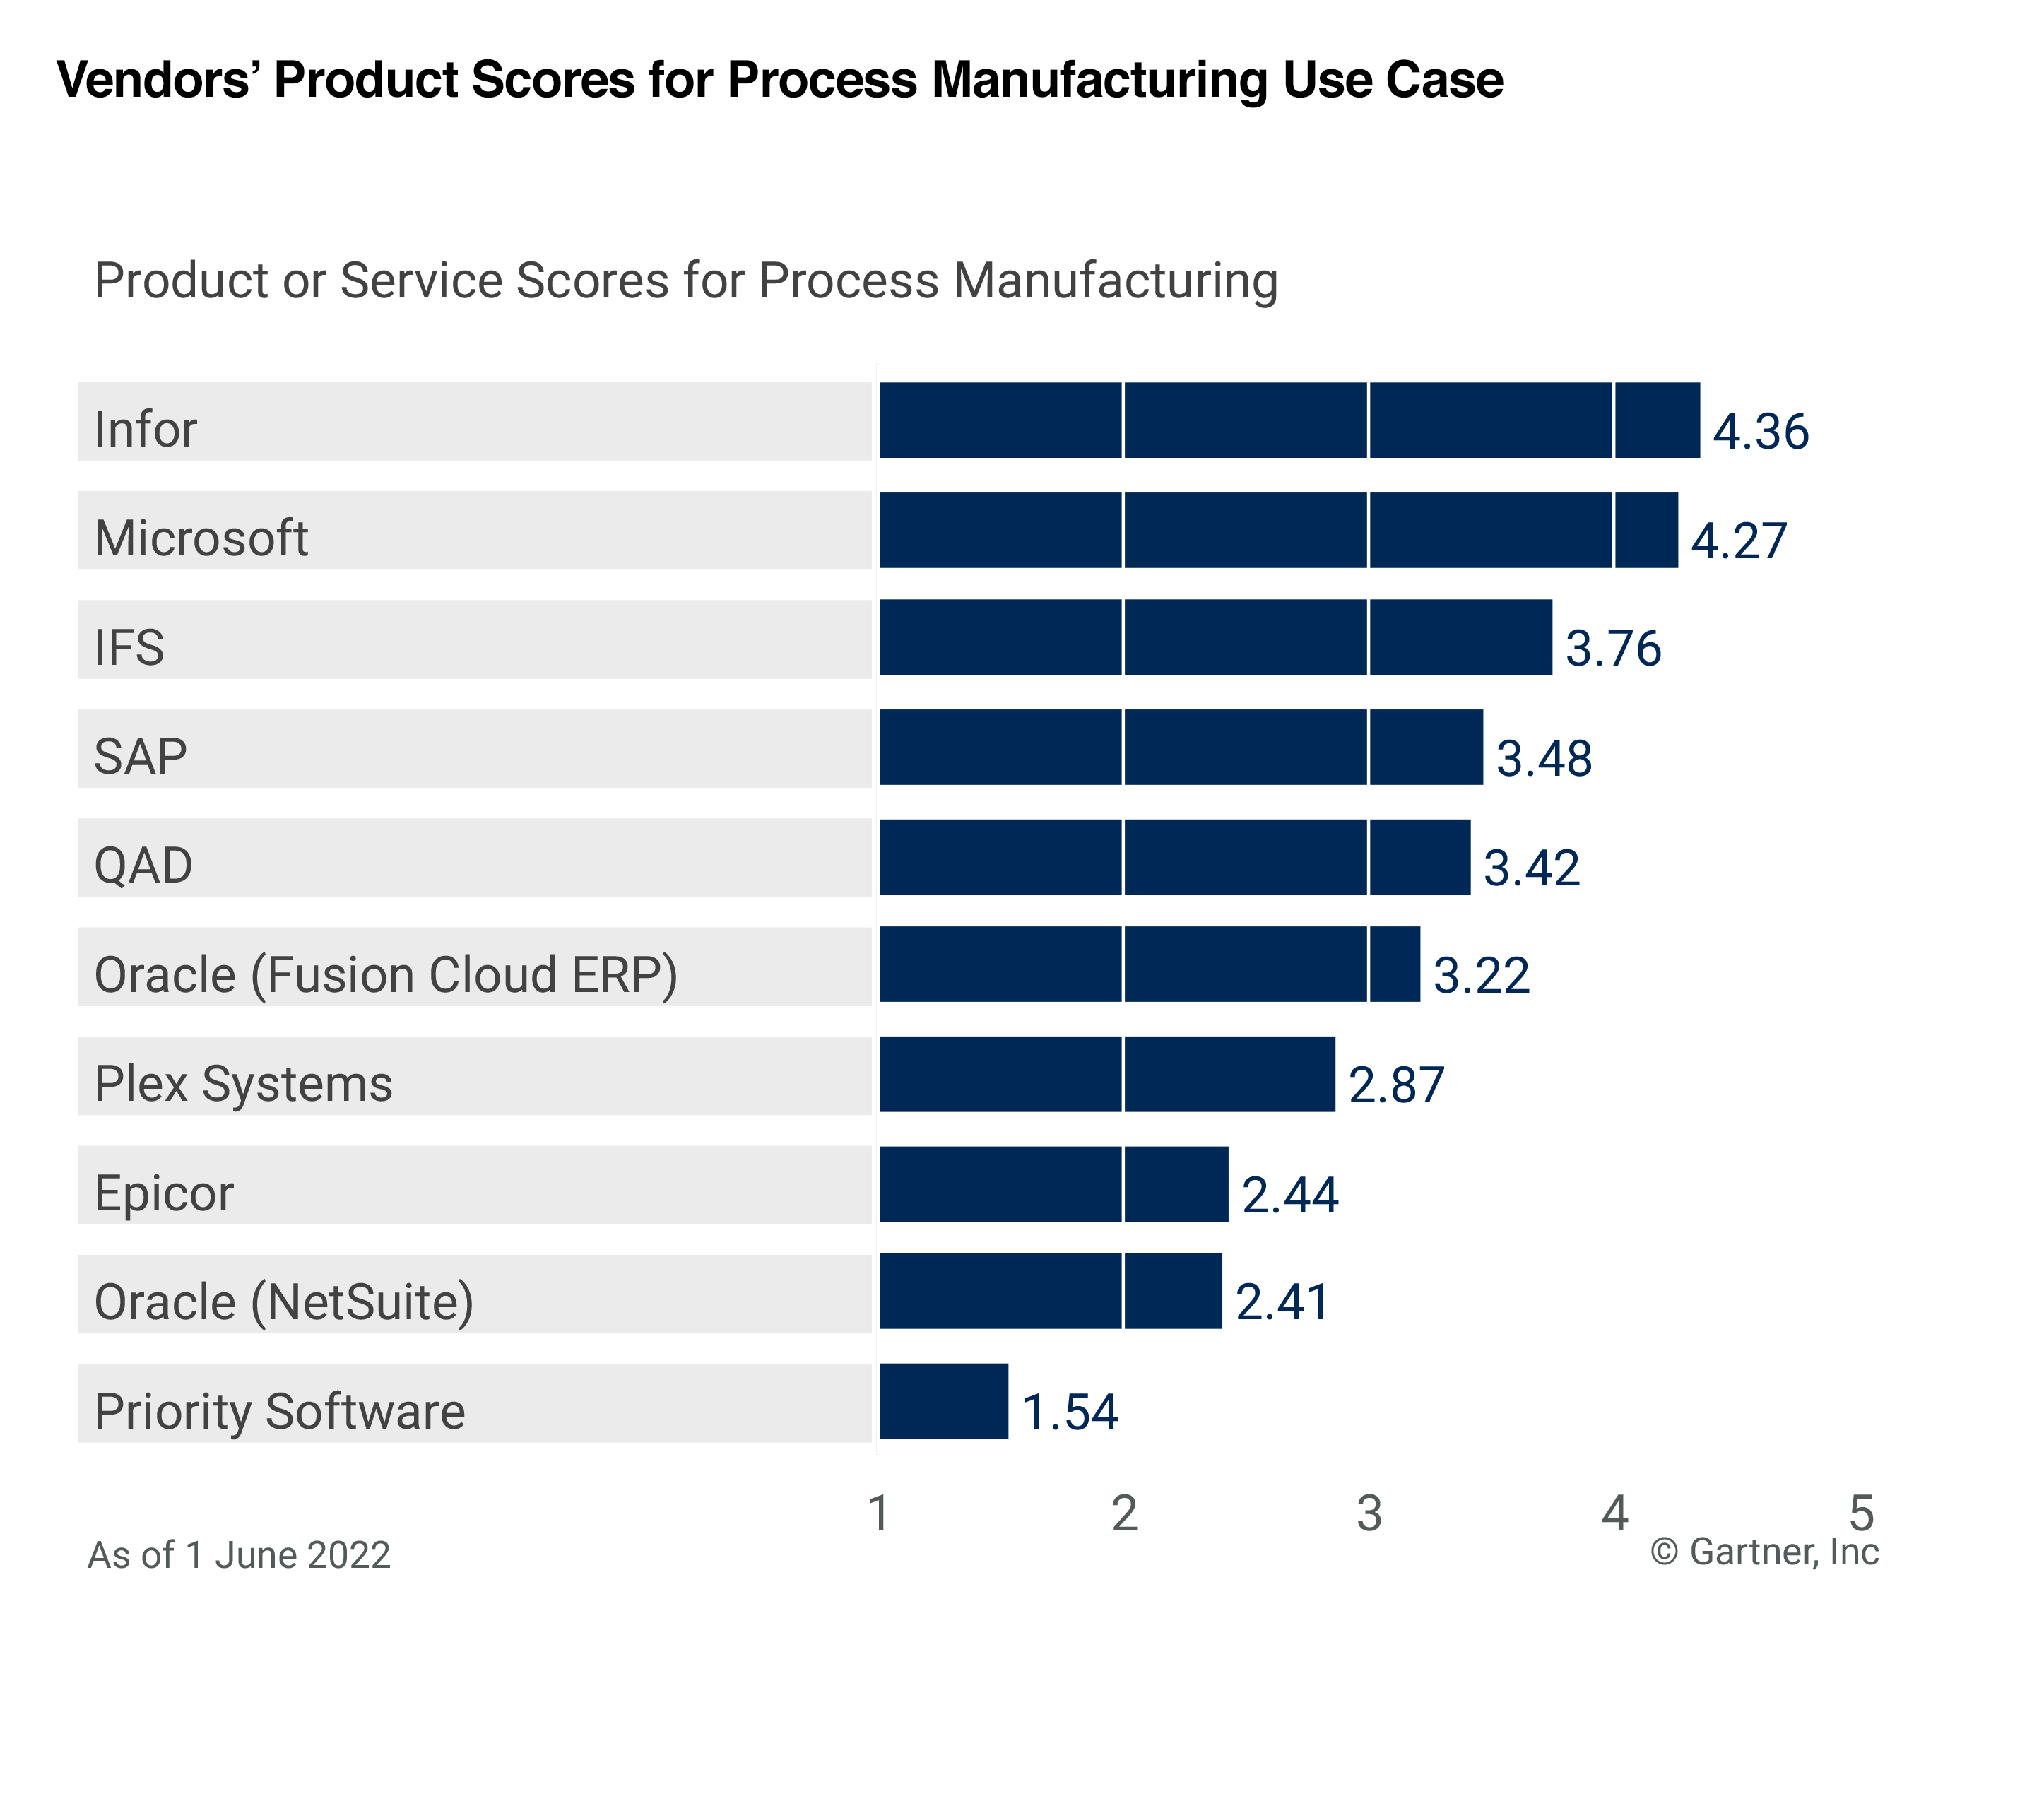 Vendors' product scores for process manufacturing use case